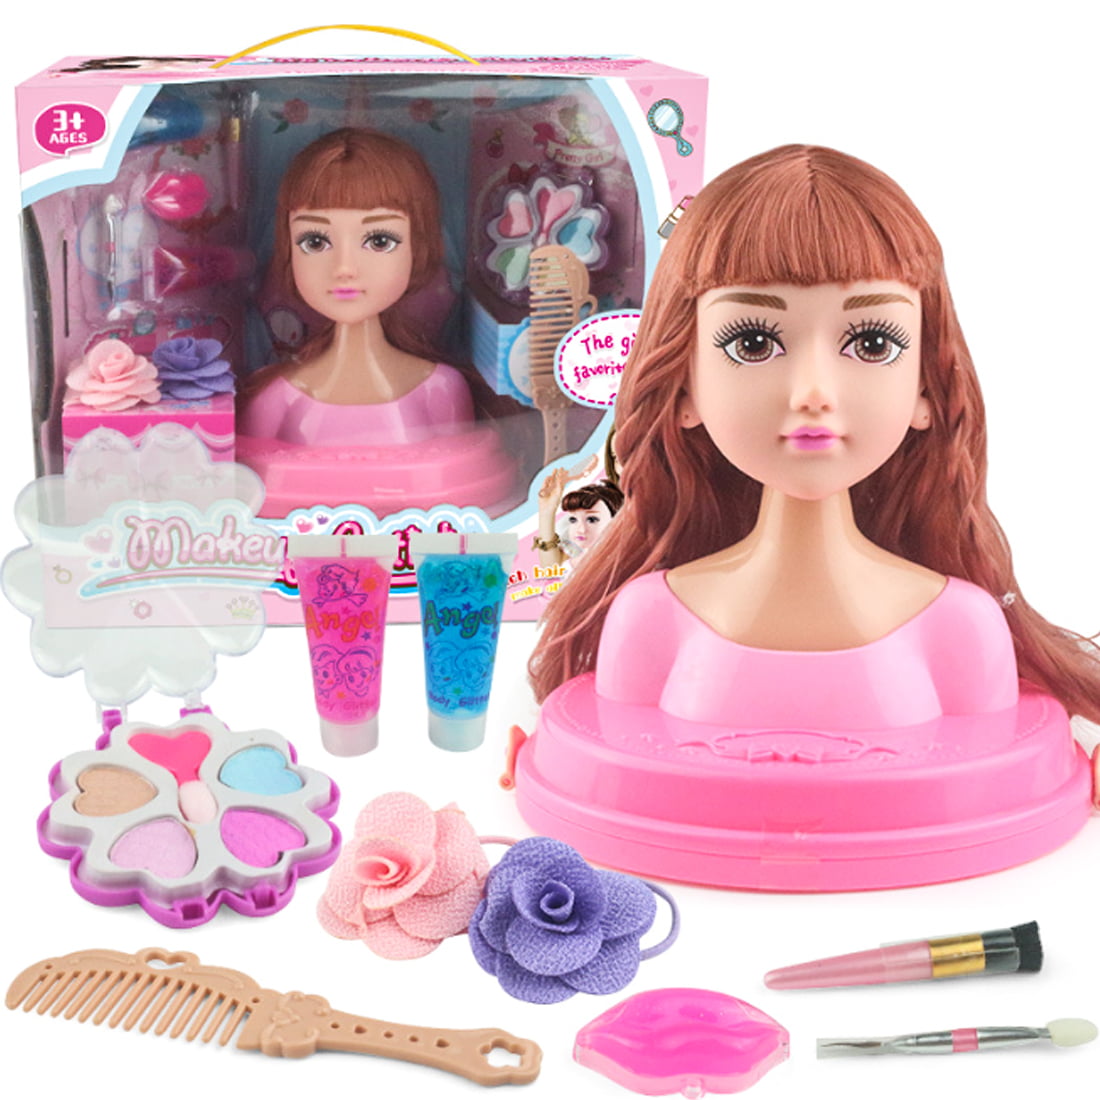 Barbie Magic Hair Styler for the PC - YouTube